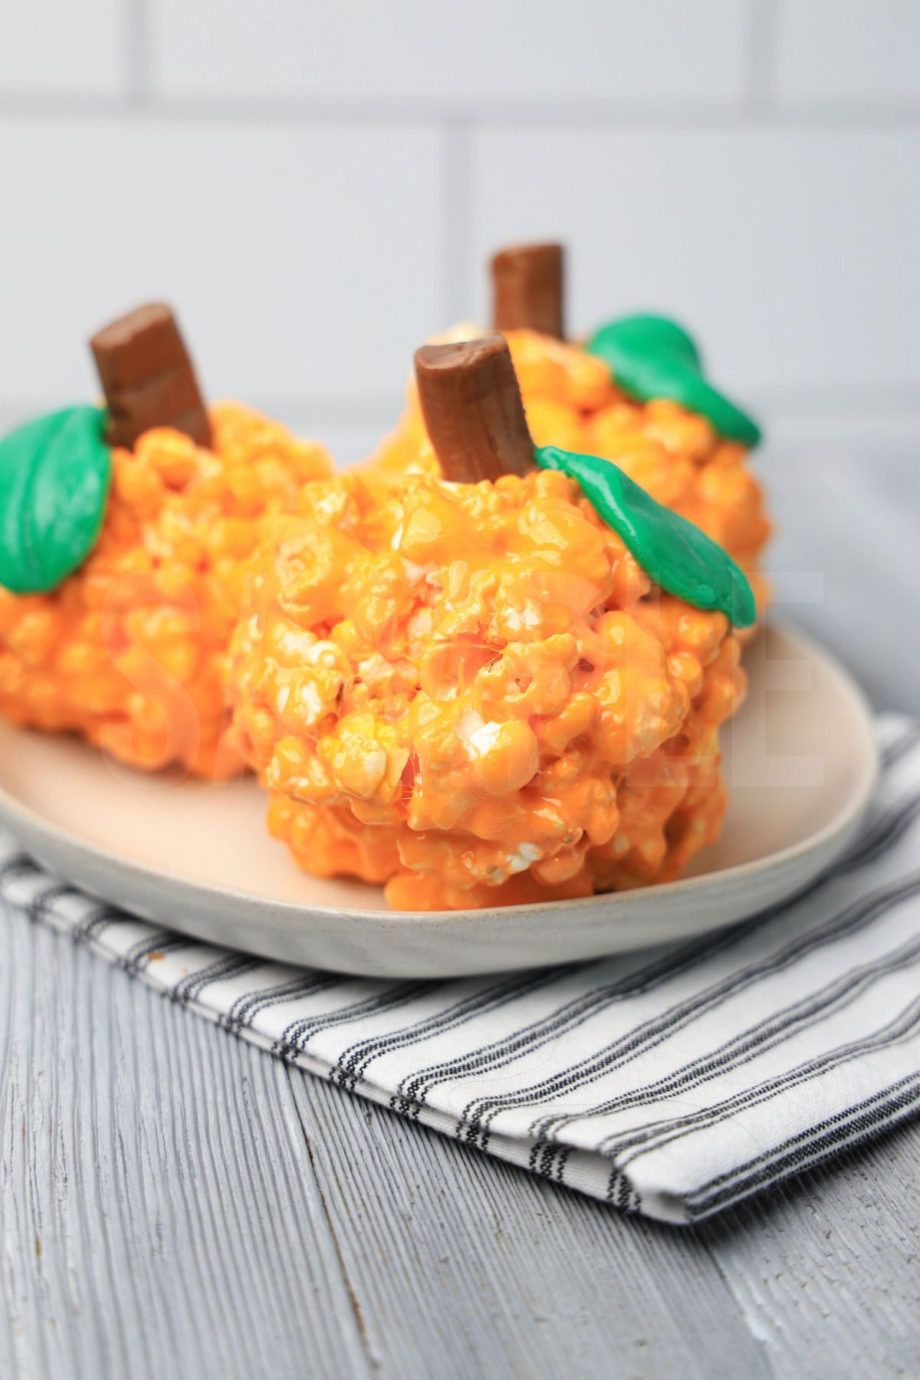 The Pumpkin Popcorn Balls comes on a white plate with a white striped napkin on a gray wood backdrop.